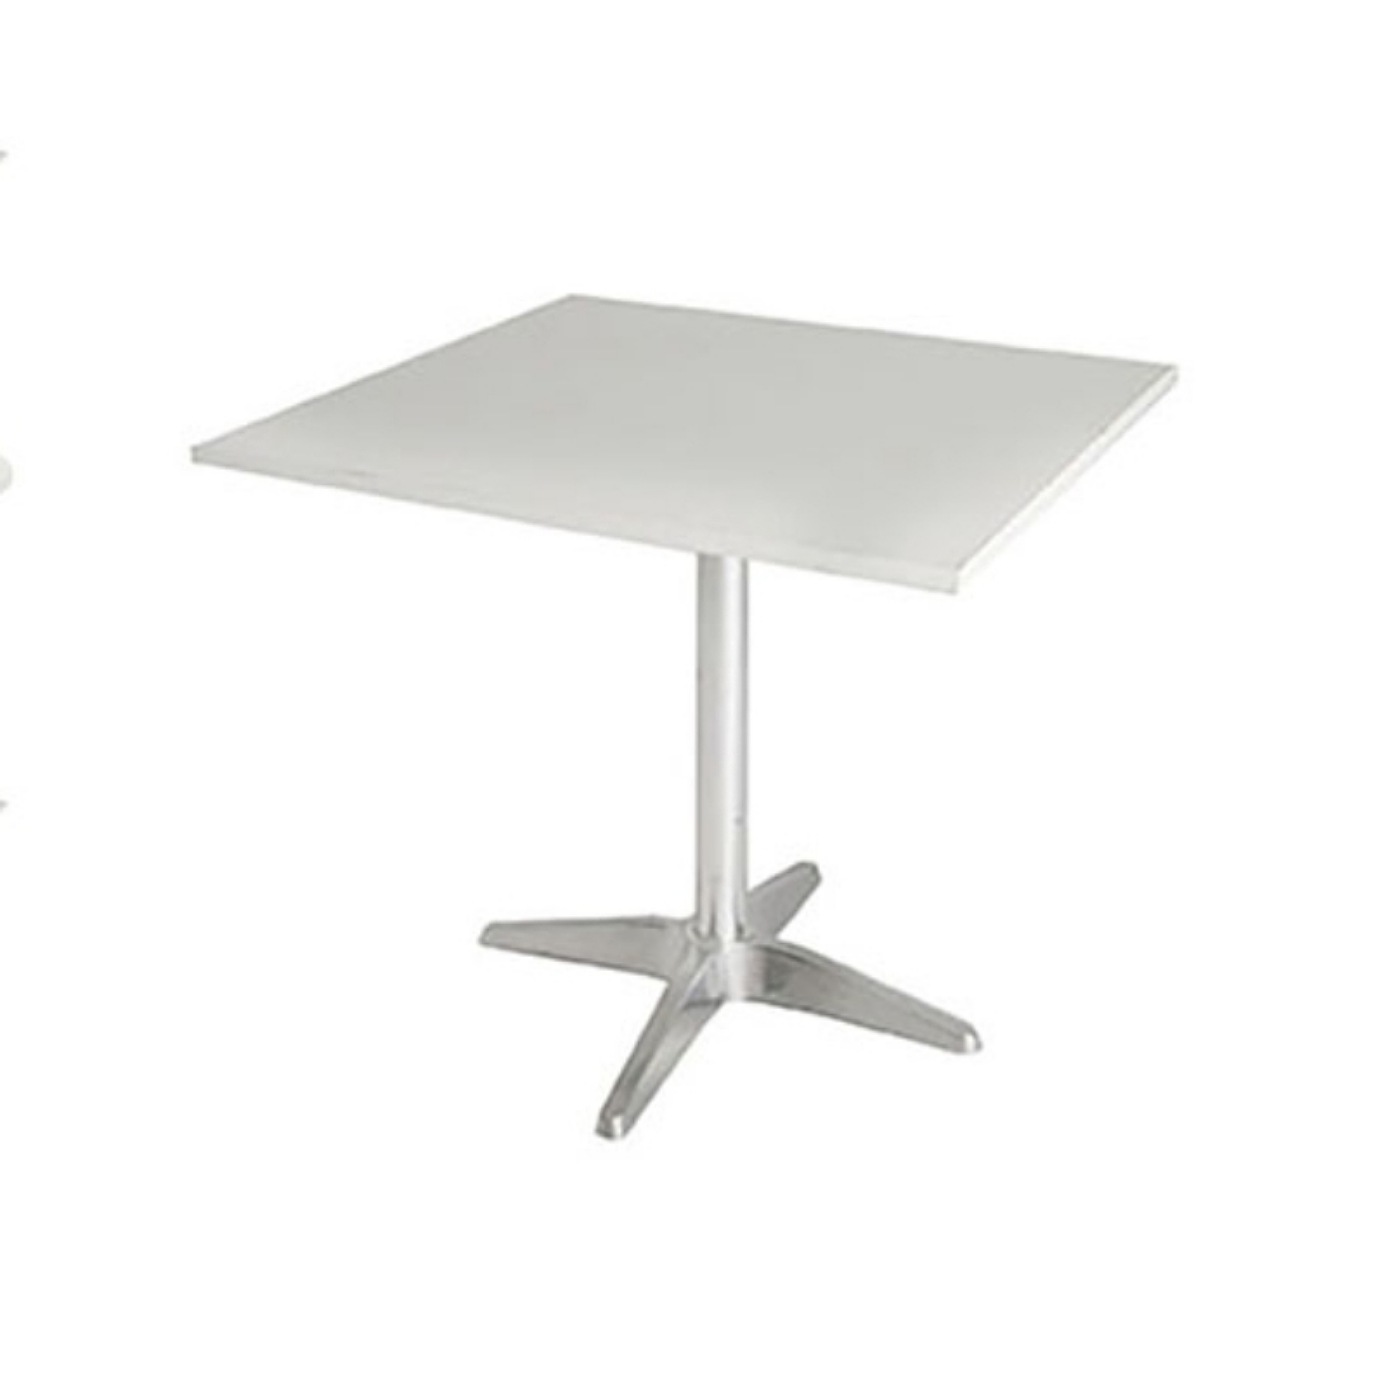 Square Cafe Table With White Wooden Top And Steel Legs.